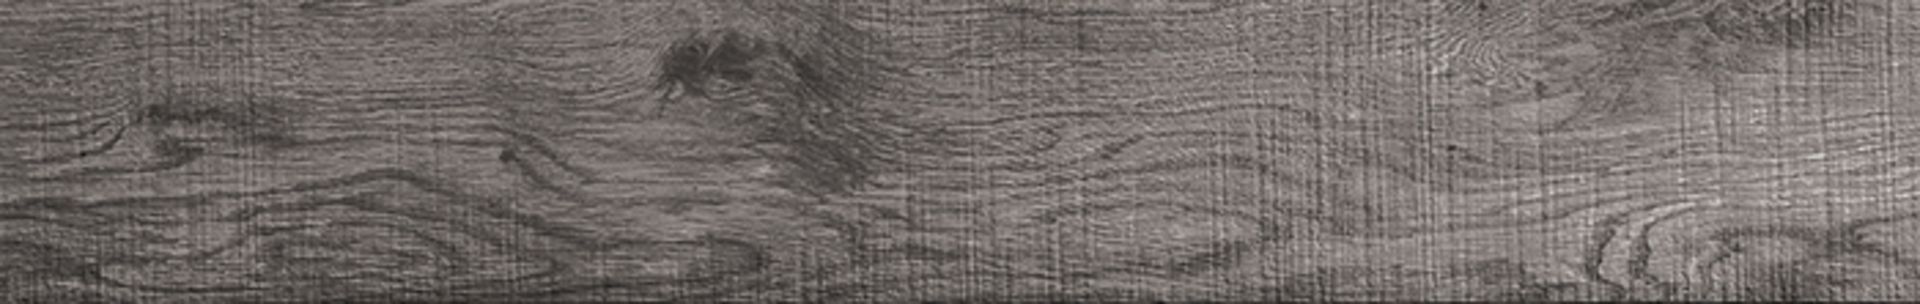 10.68 Square Meters of Porcelanosa Zoc Oxford Anthracite Wall and Floor Tiles. 10X44.3cm per tile. - Image 3 of 3